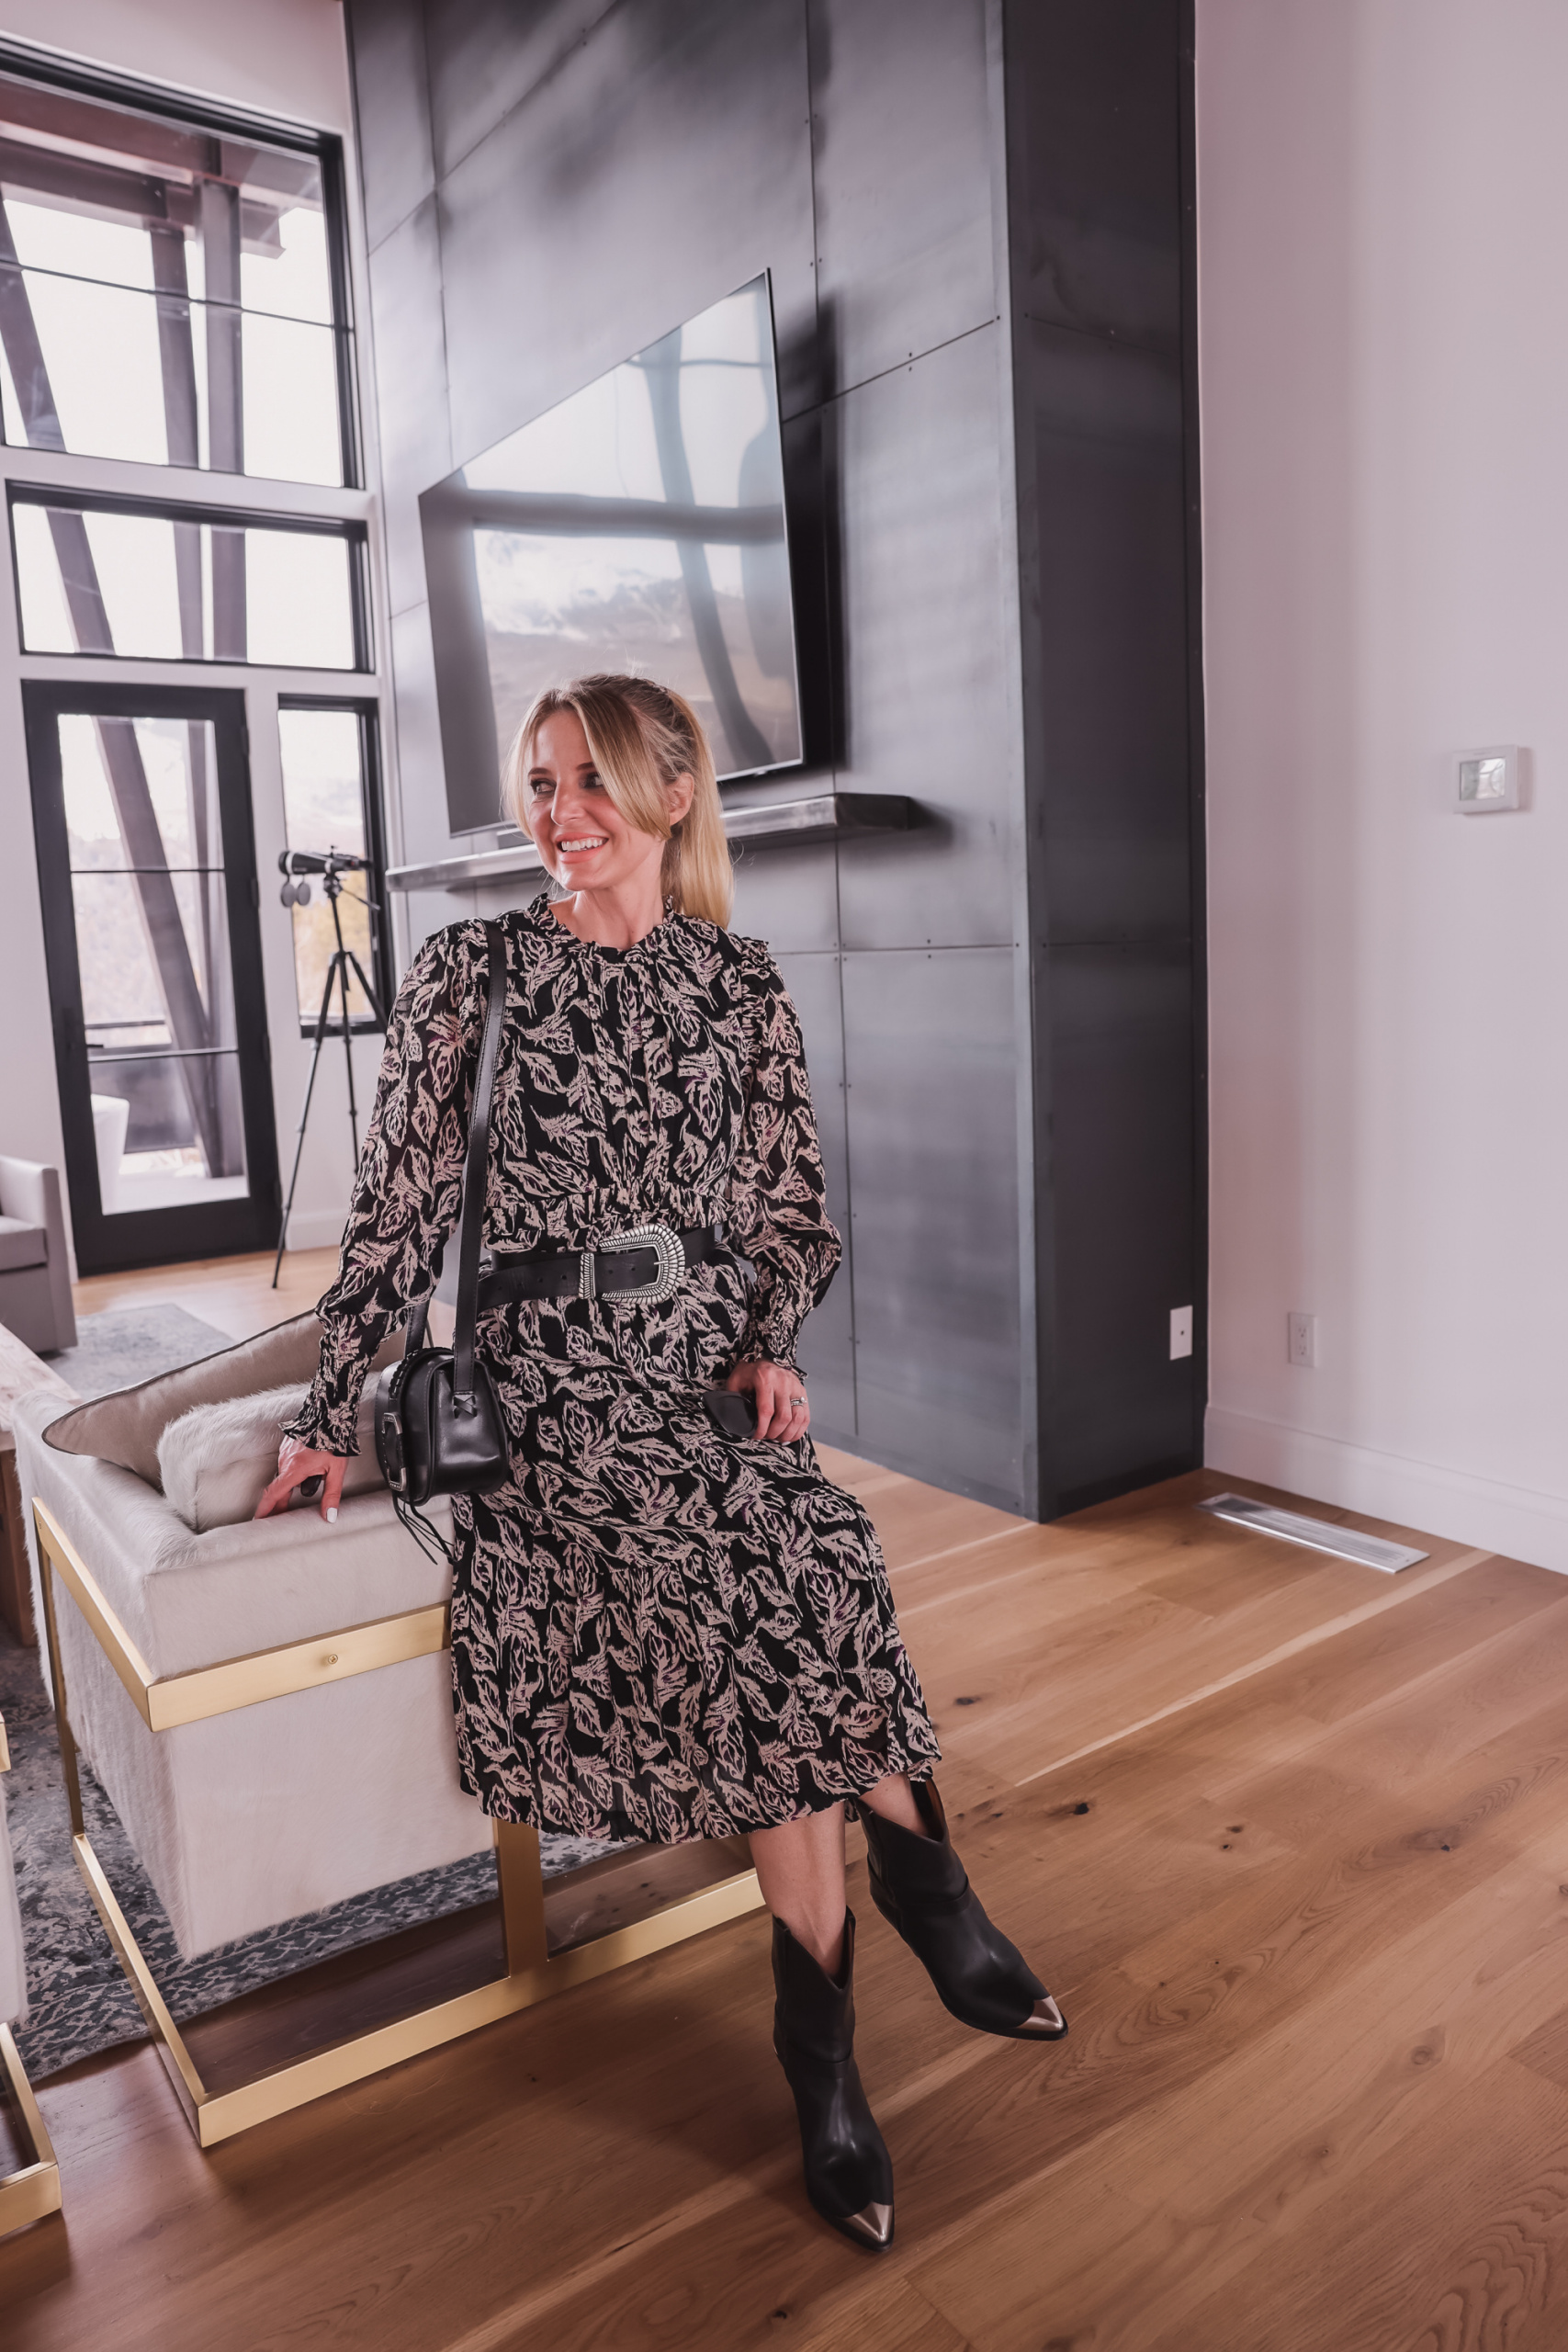 finding balance during menopause, menopause update, menopause experience, what to expect during menopause, erin busbee, busbee style, ba&sh black and white printed dress, isabel marant boots, ba&sh western inspired belt, ba&sh western inspired handbag